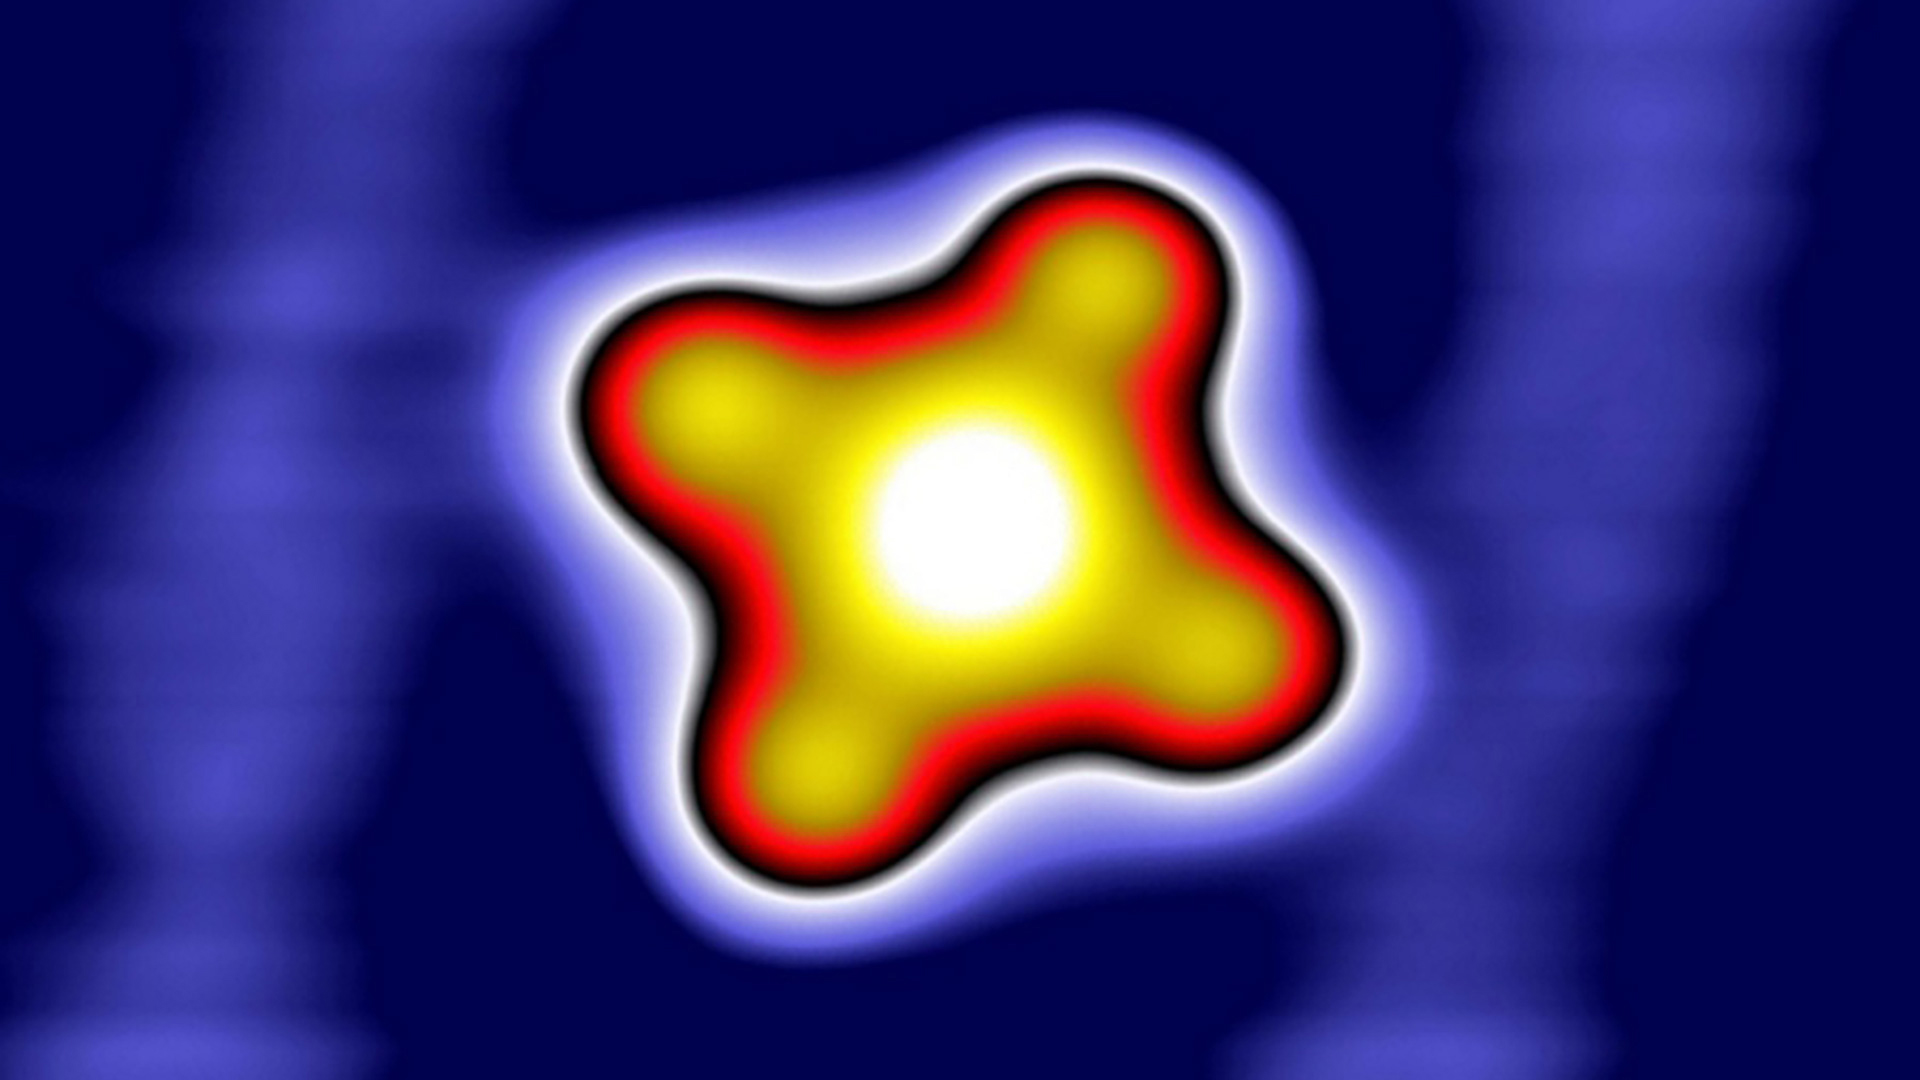 White, yellow, red, black, blue glowing shape on dark blue background.